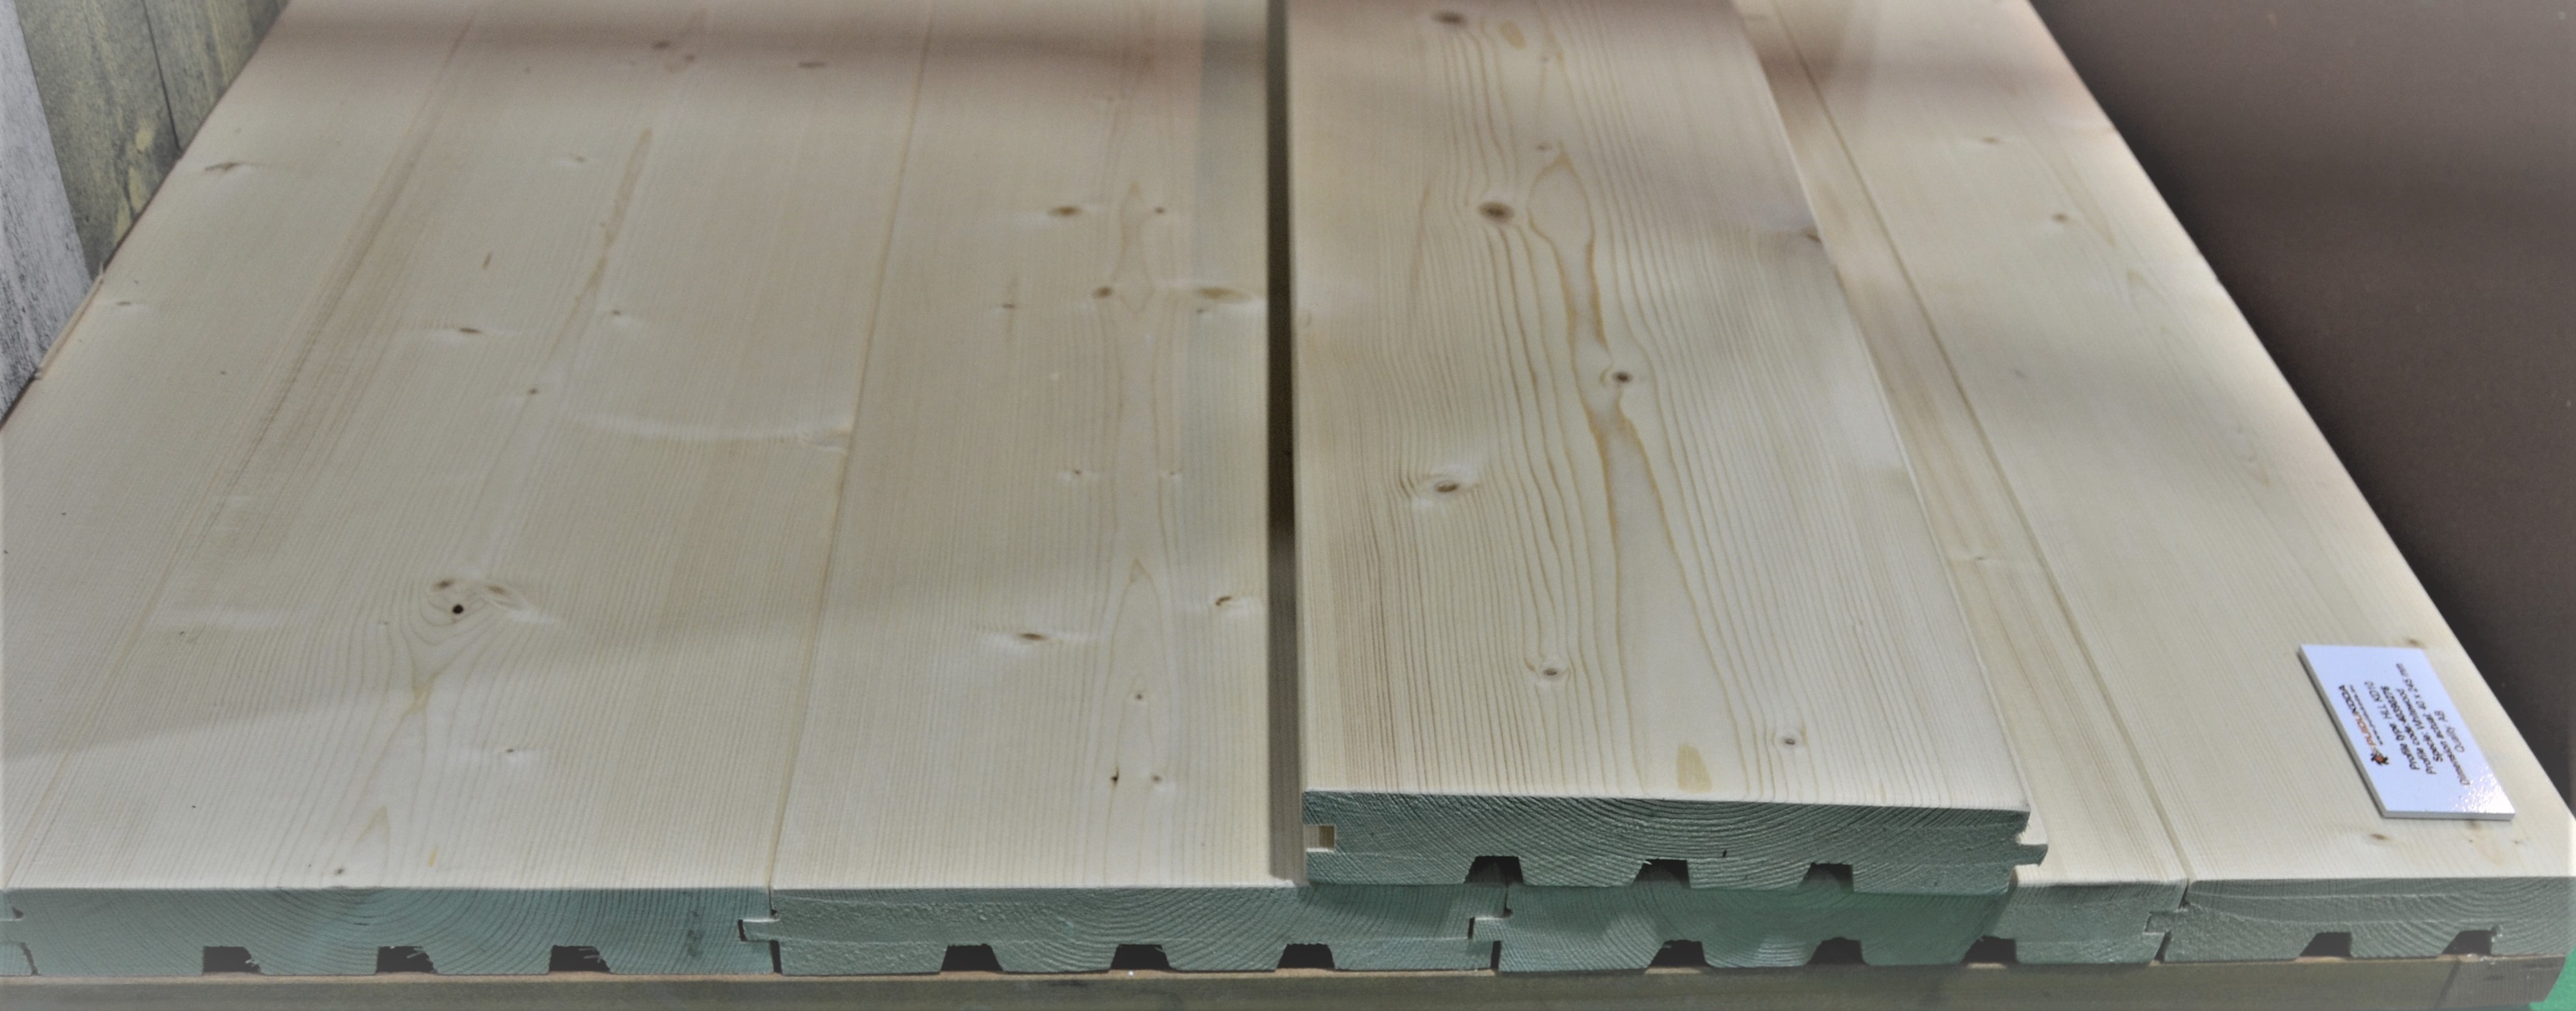 Timber Cladding, Decking, Flooring, C24 Technical Support Specification Help Puidukoda